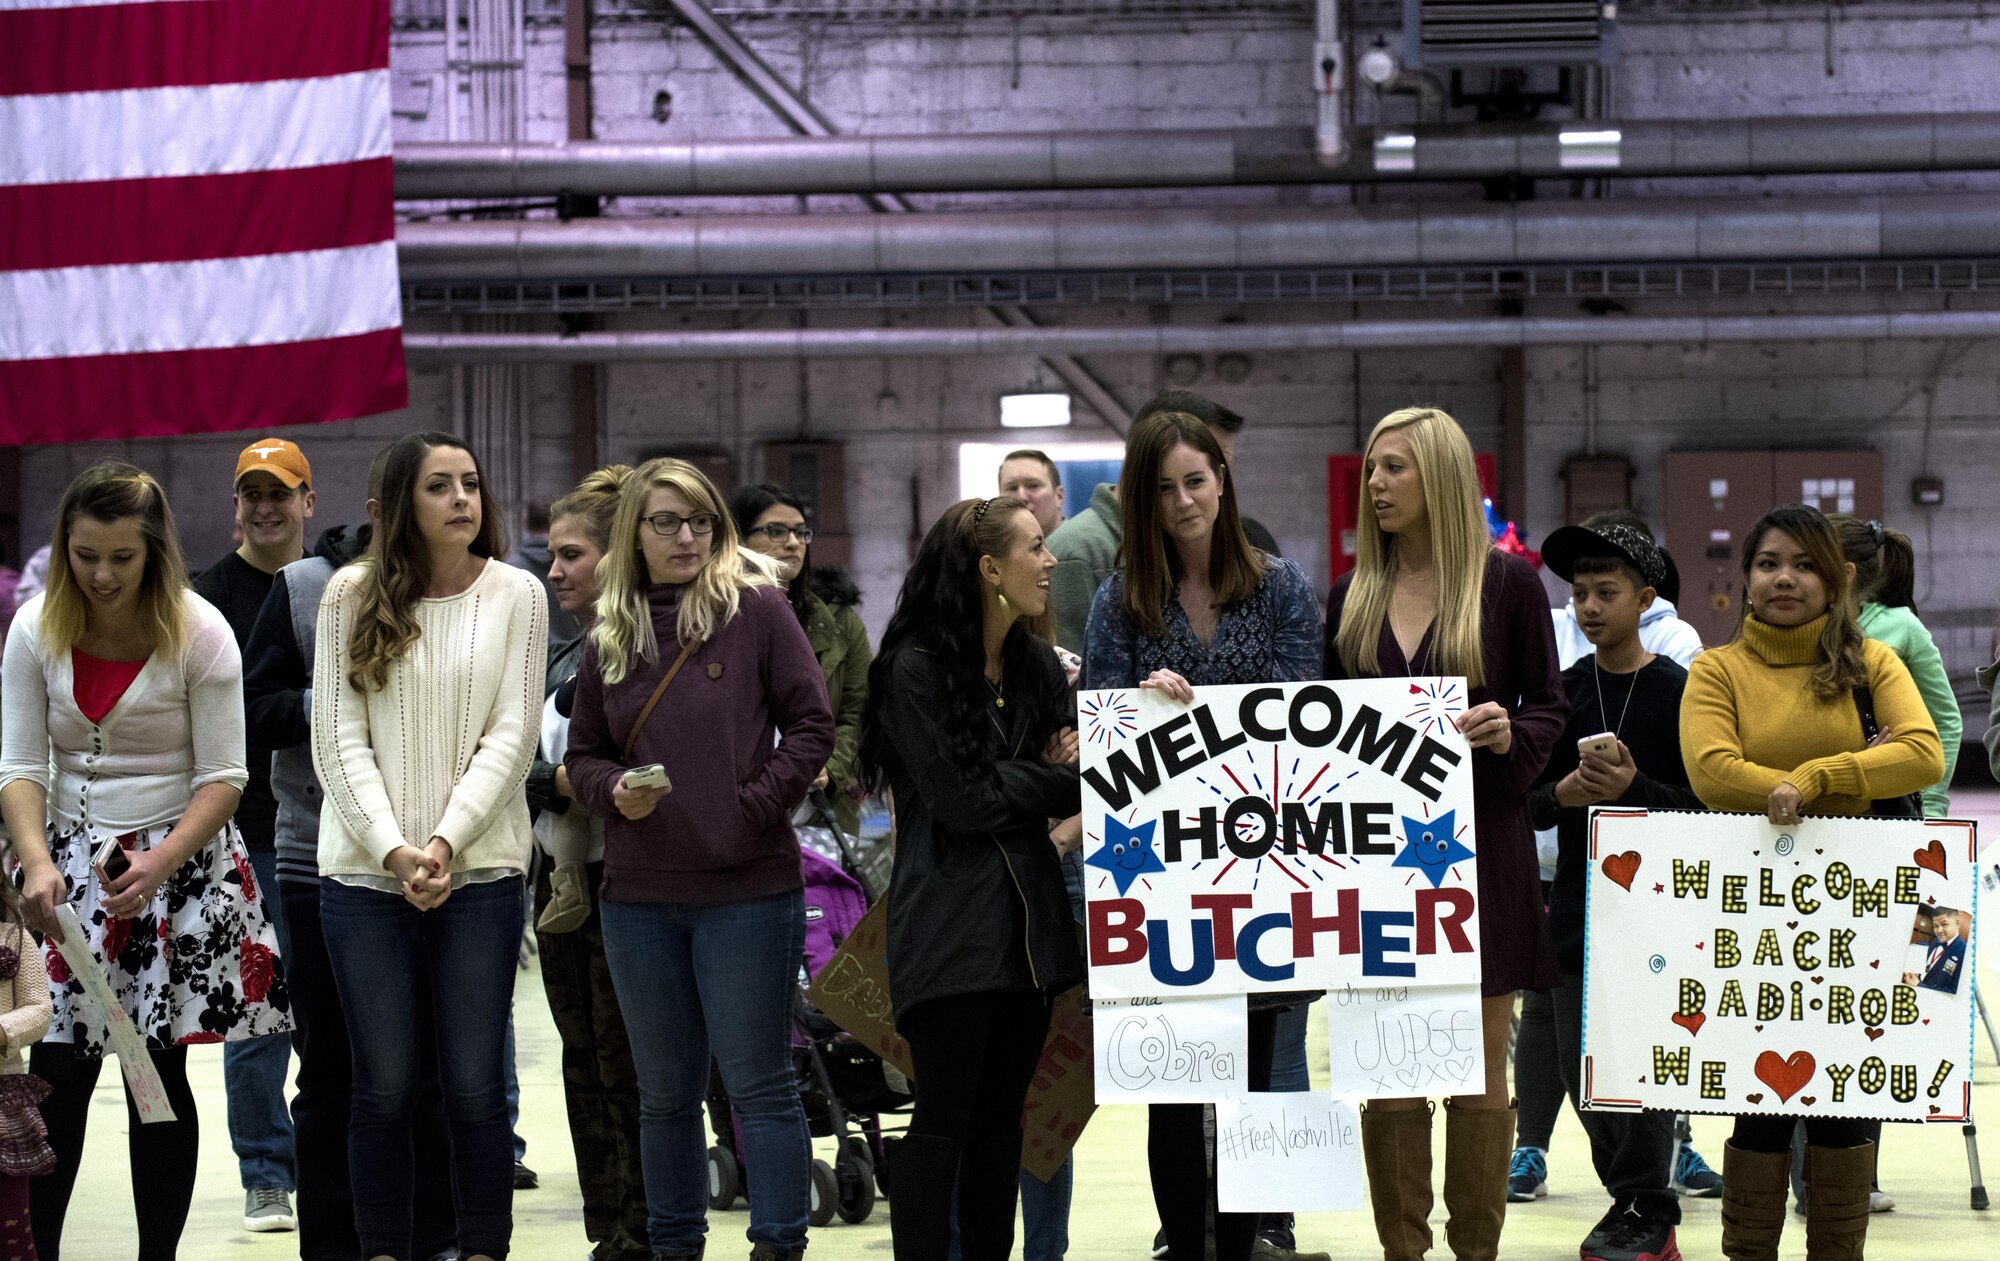 Friends and family members of Airmen assigned to the 480th Expeditionary Fighter Squadron await the squadron’s arrival back to Spangdahlem Air Base, Germany, Oct. 12, 2016. Approximately 300 squadron members arrived from a six-month deployment to Southwest Asia where they provided close air support and dynamic targeting operations in support of Operation Inherent Resolve. (U.S. Air Force photo/Airman 1st Class Preston Cherry)